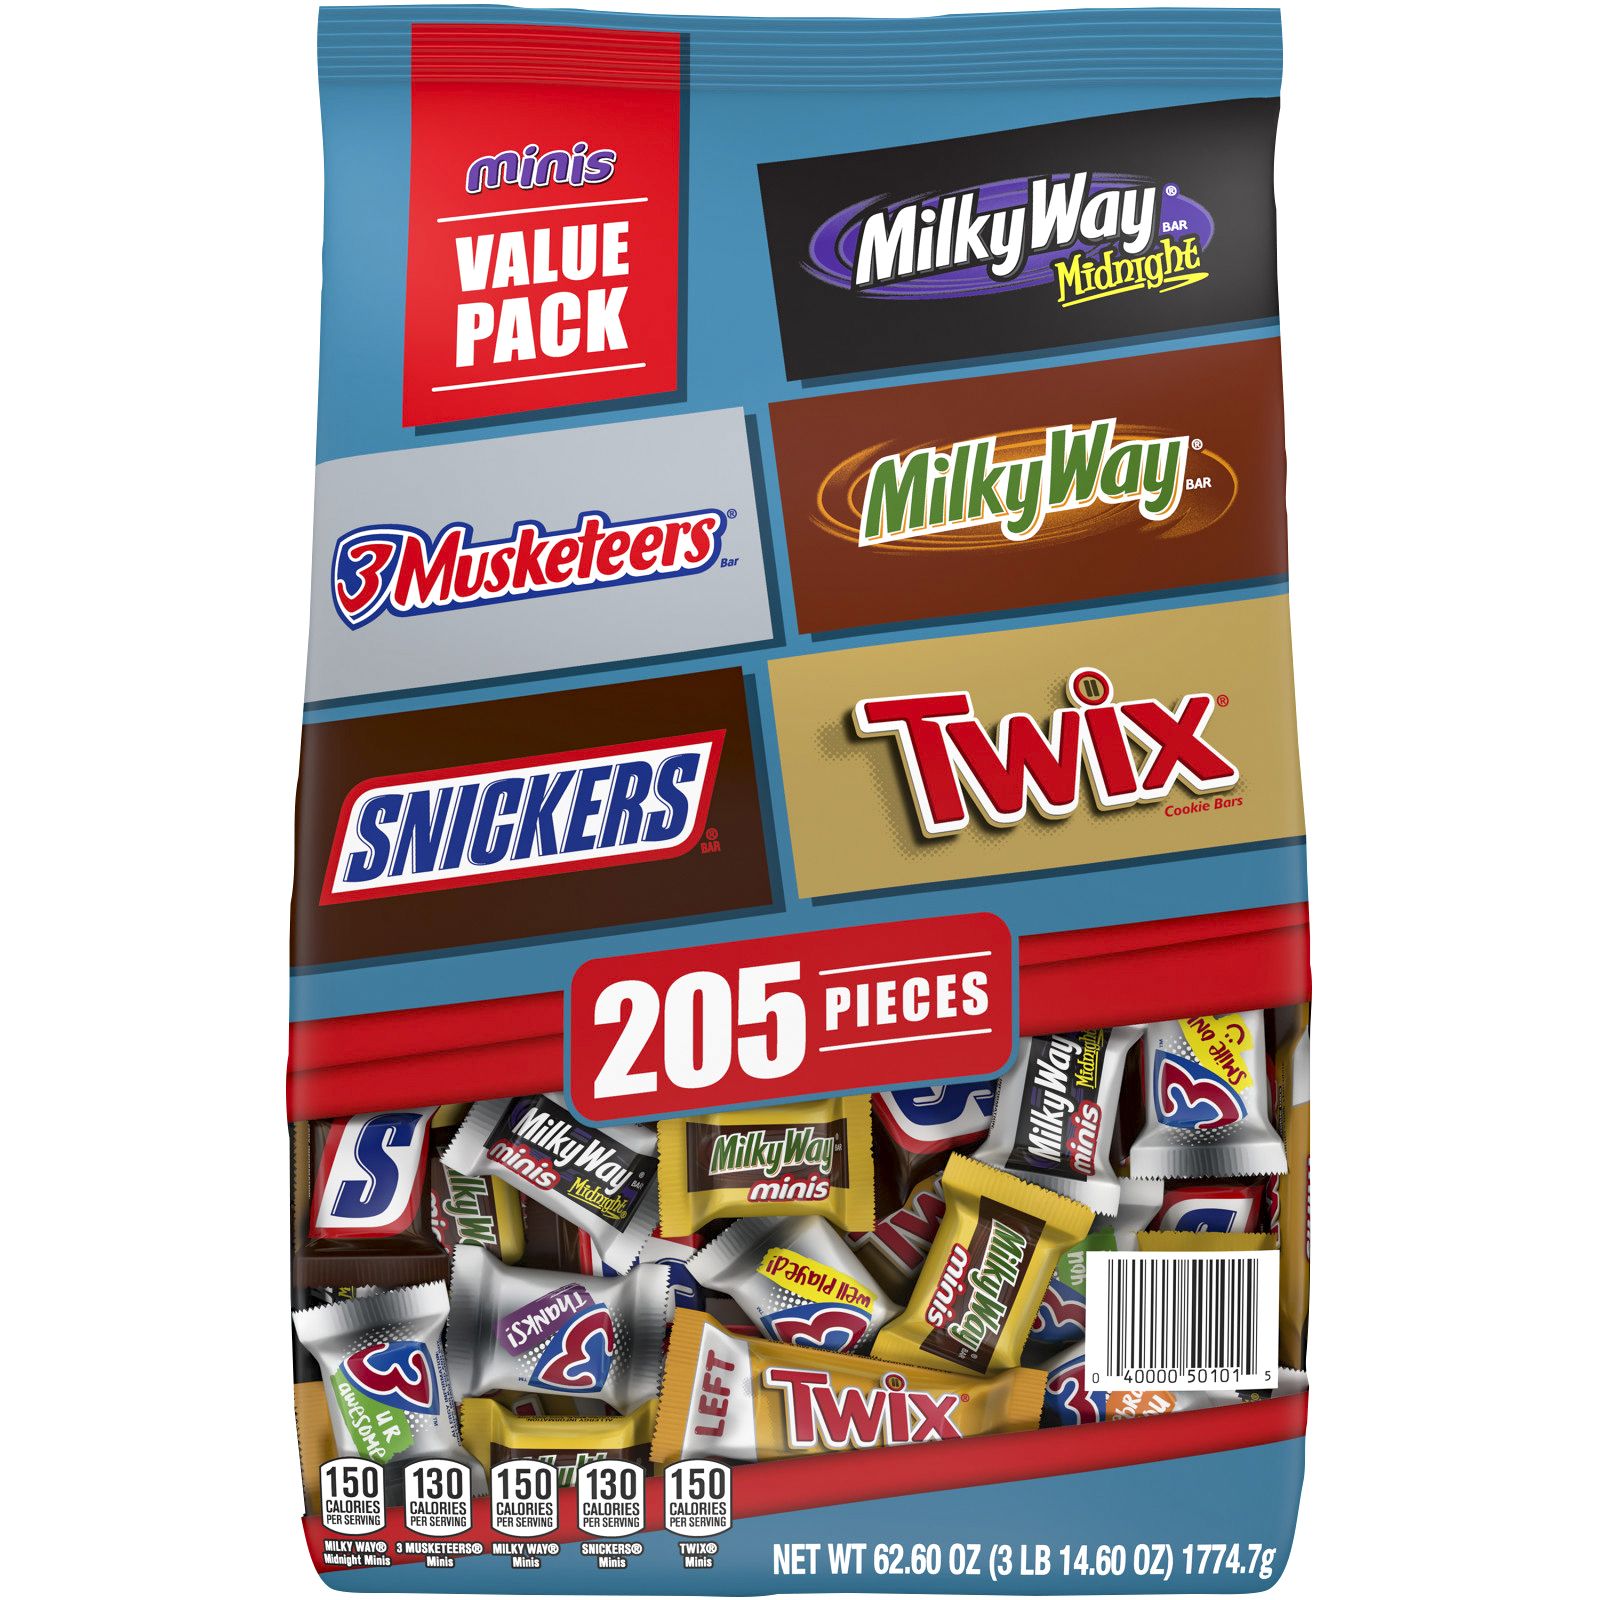 Snickers, Twix And More Chocolate Candy Bars, Bulk Miniature Candy, 205 ct.